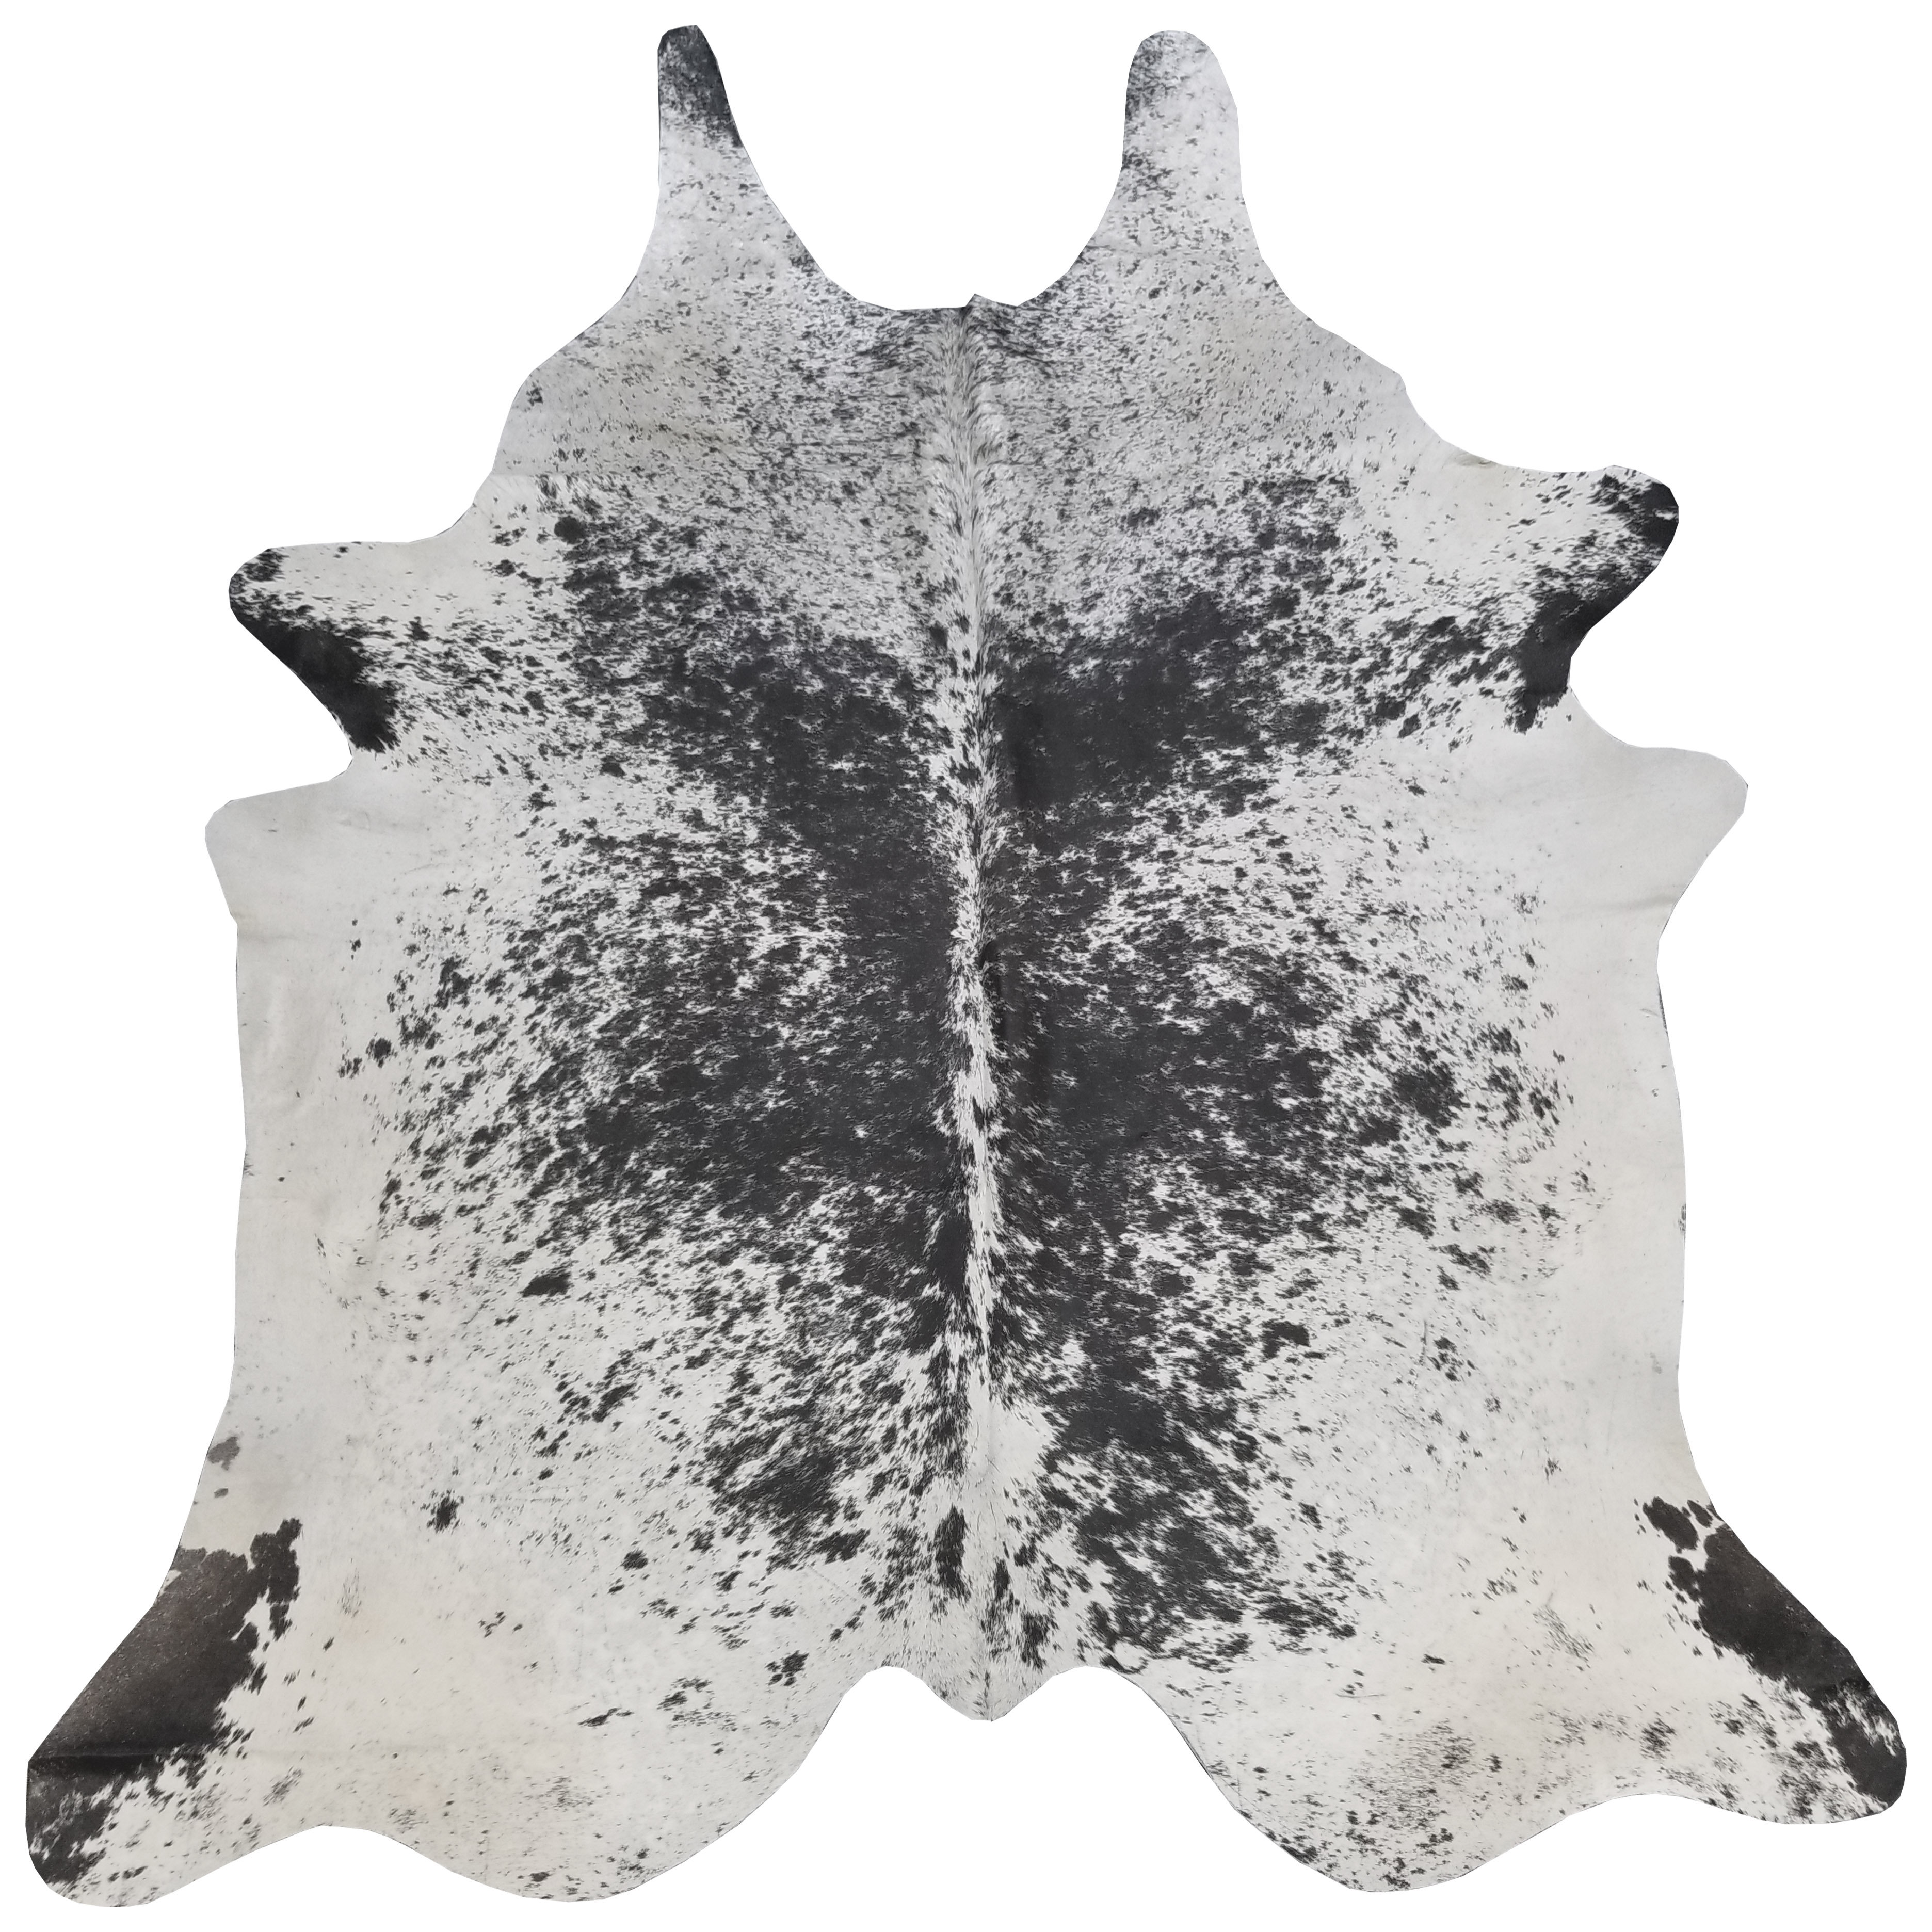 Black and White Brazilian Cowhide Rug Cow Hide Area Rugs Skin Leather Size LARGE 